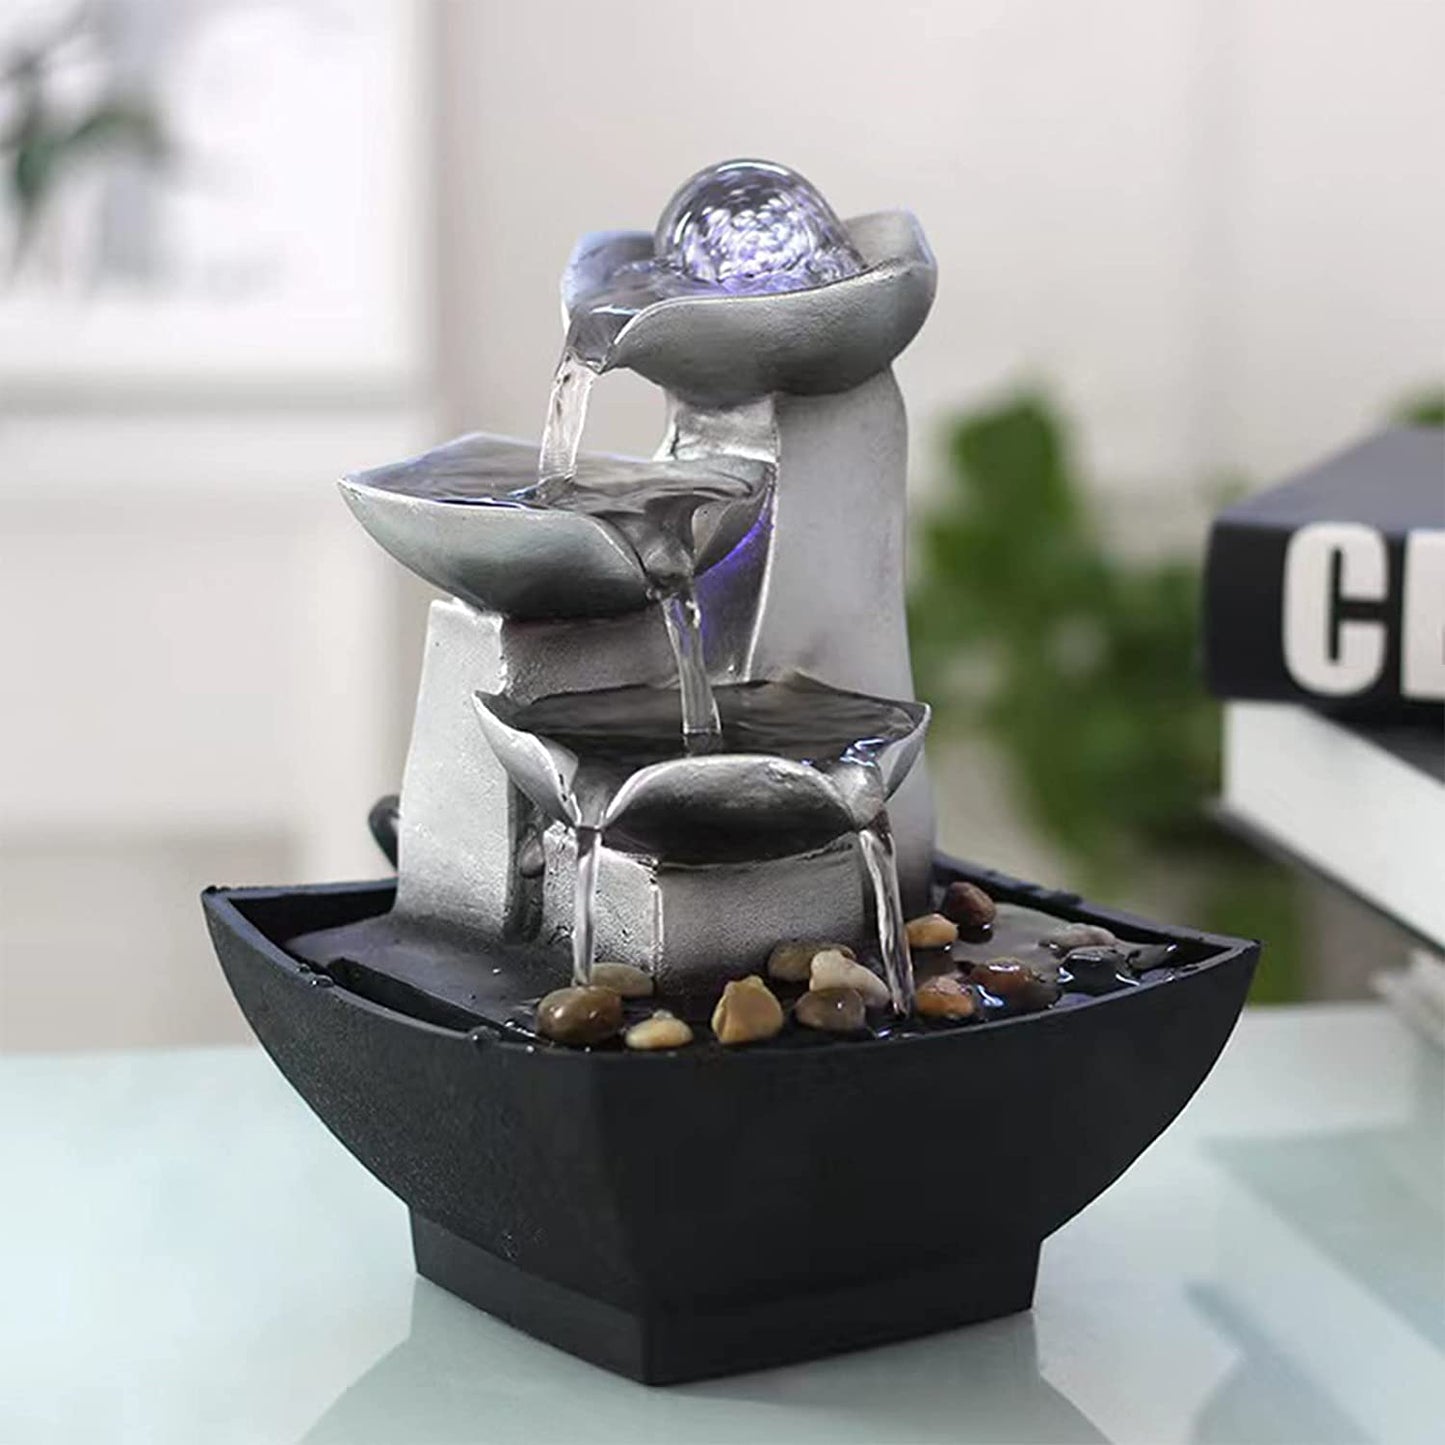 A calming tabletop 3-tier fountain with water cascading down 3 levels into the base which is filled with water and rocks.